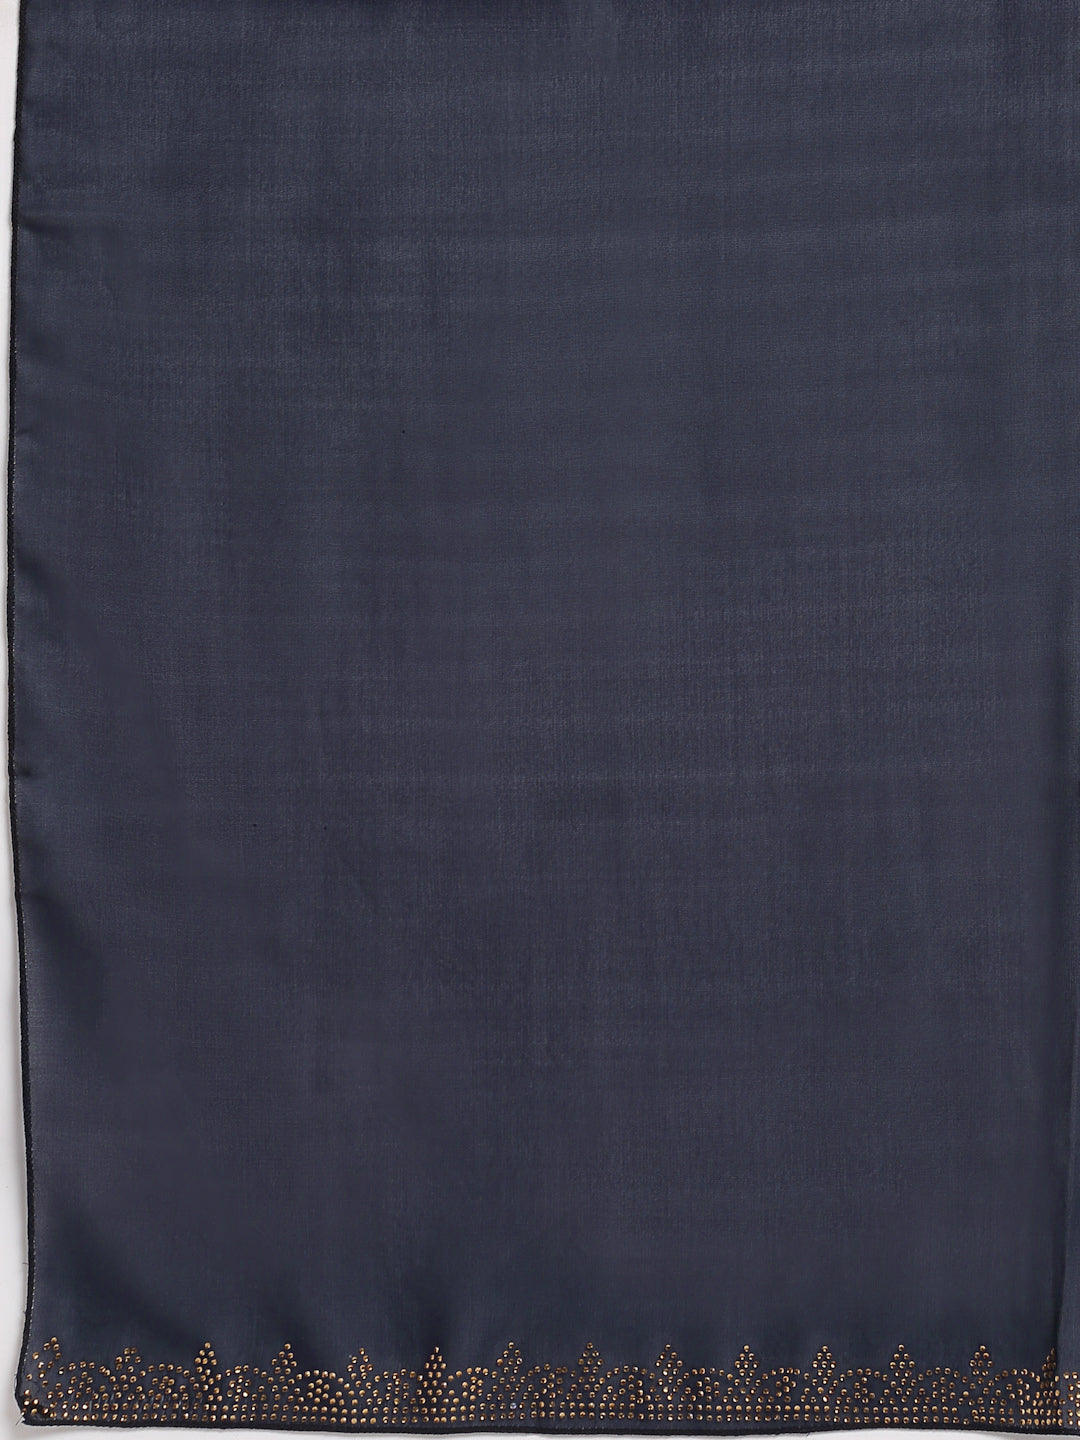 Klotthe Women Navy Blue Solid Burqa With Scarf